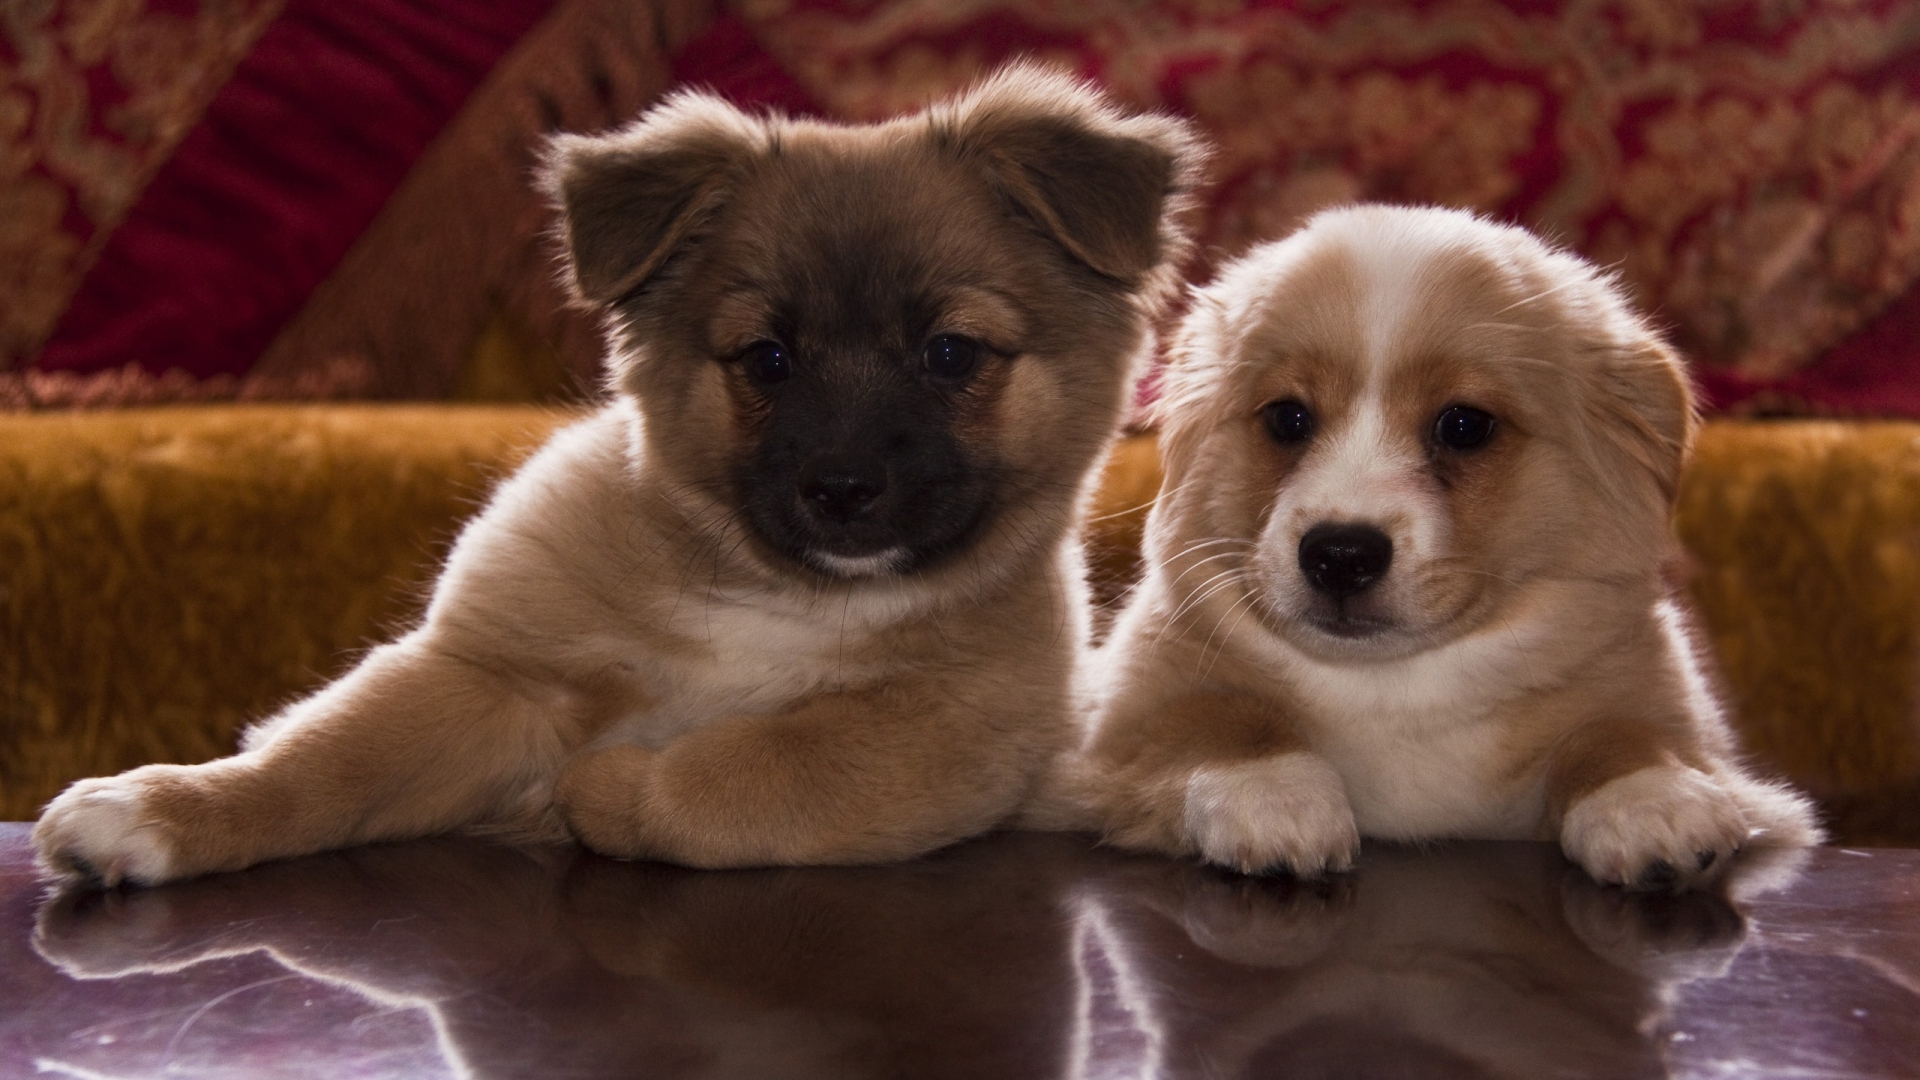 Cute Puppies for 1920 x 1080 HDTV 1080p resolution